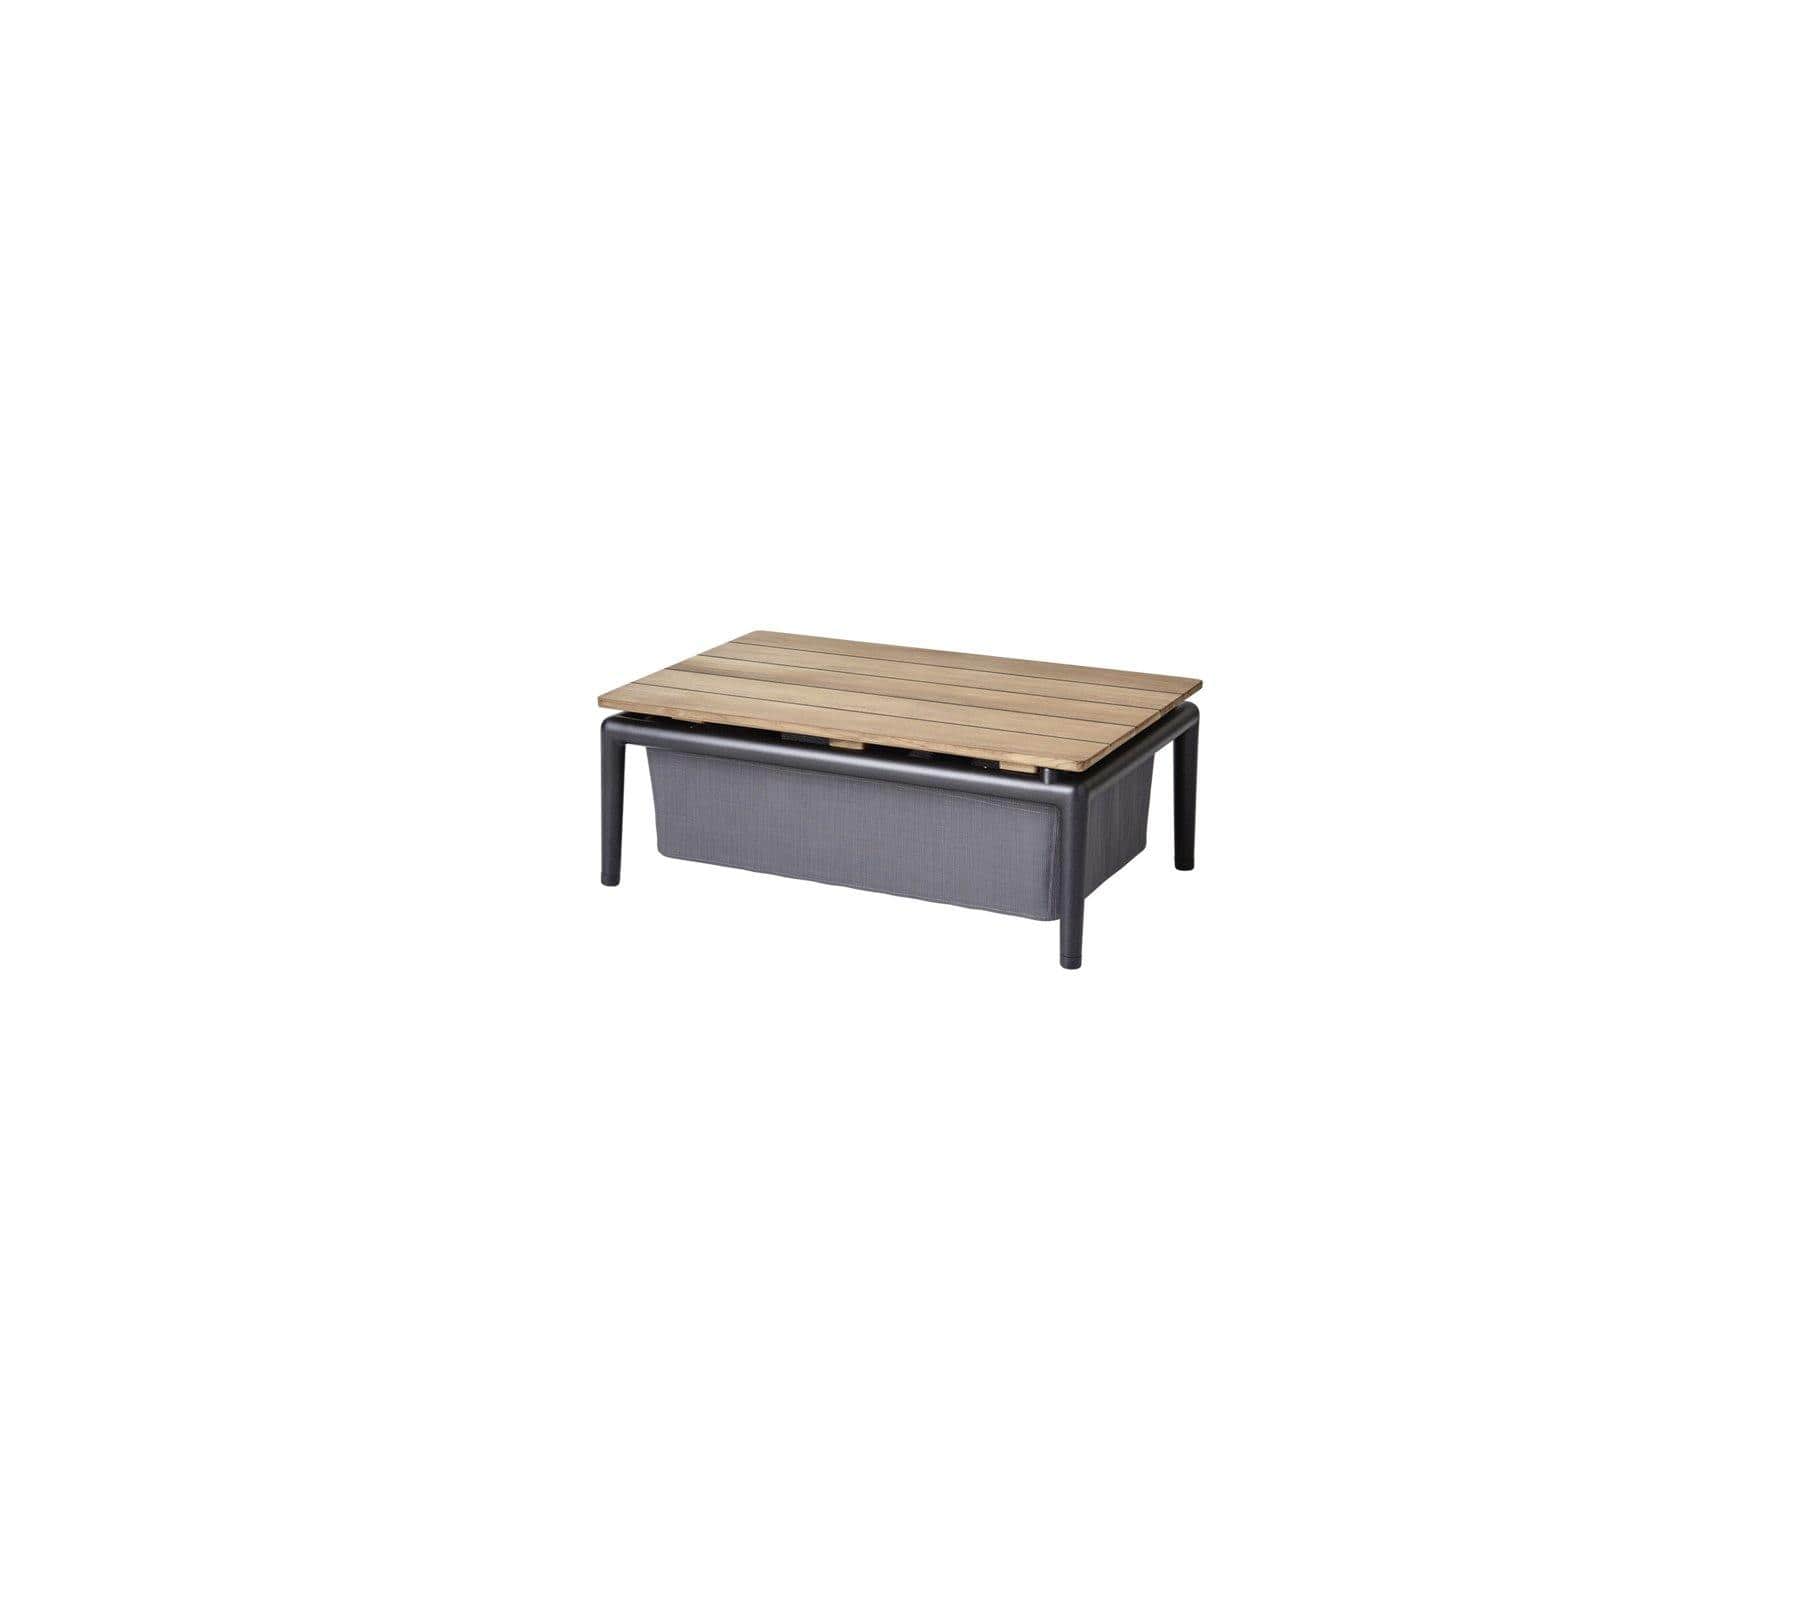 Cane-Line - Conic box table 29.2x20.5inches | 5037